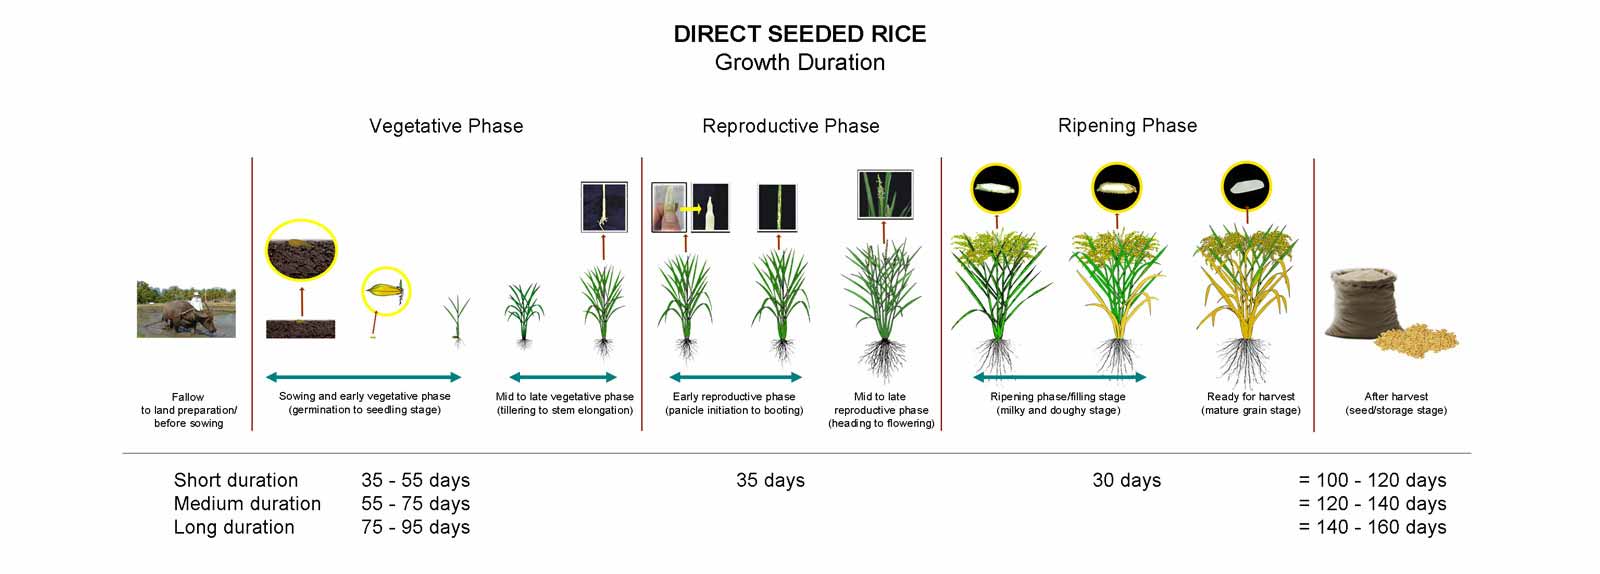 Variation in length of vegetative phase results in the short, medium, and long duration types of rice after transplanting.